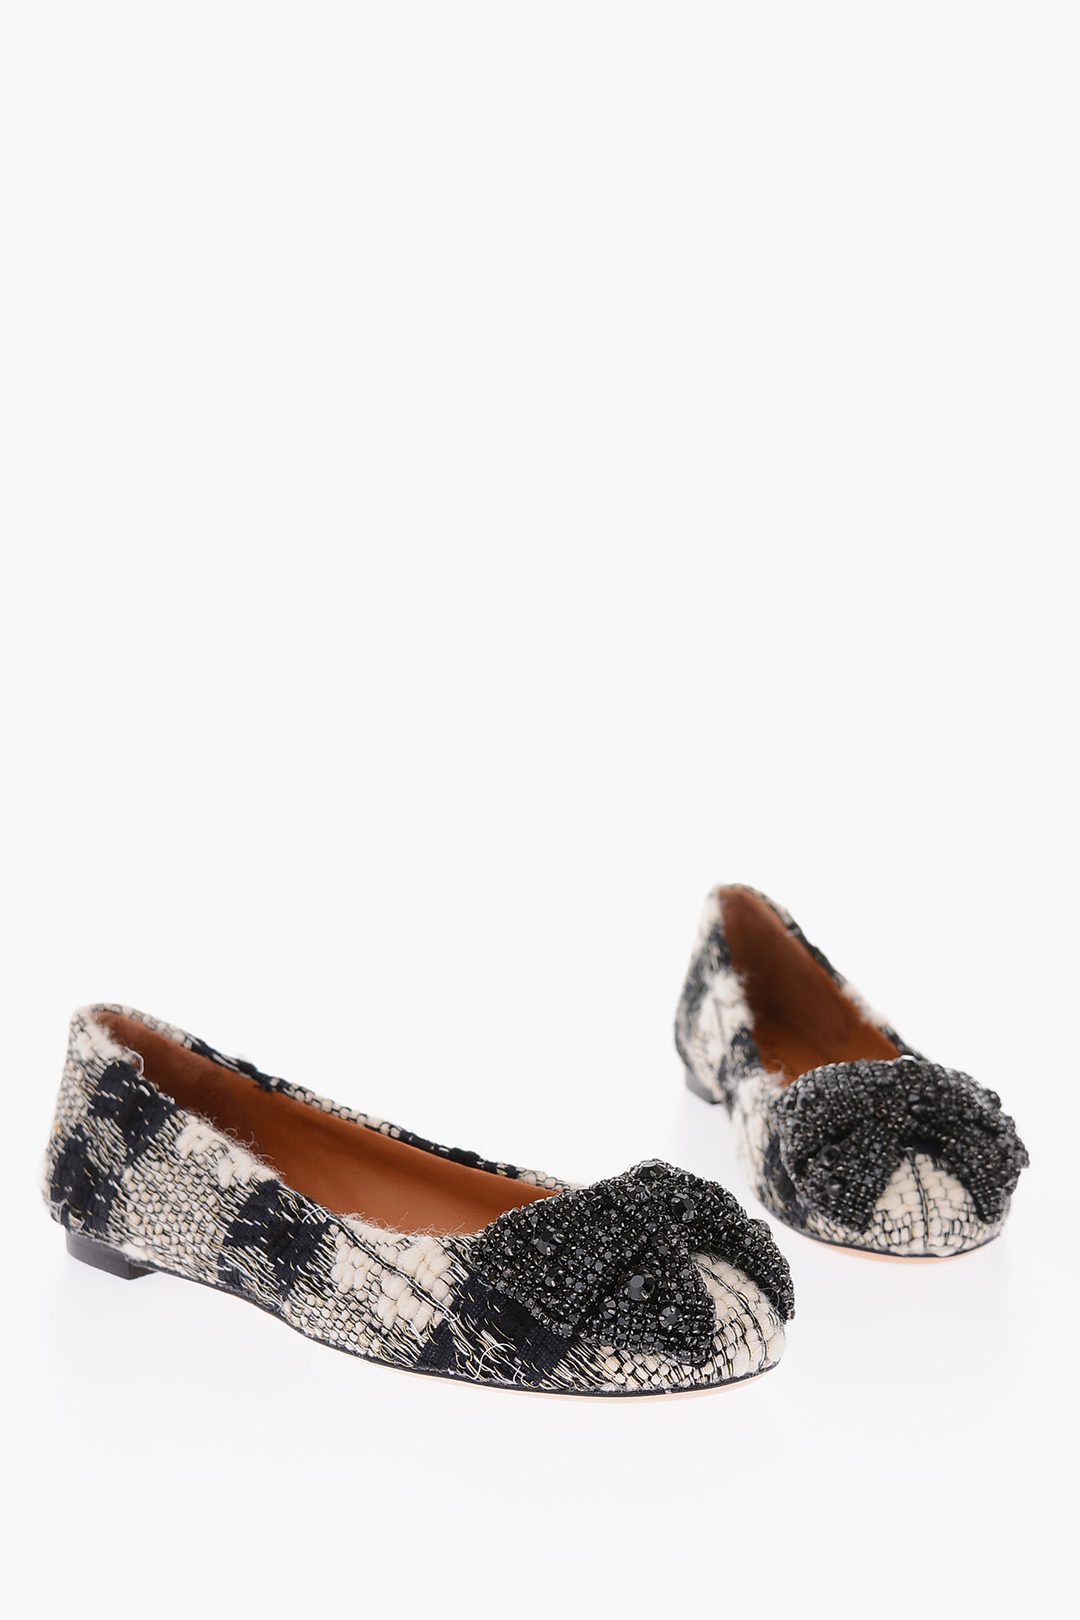 Tory Burch wool crystal bow Ballet flats women - Glamood Outlet